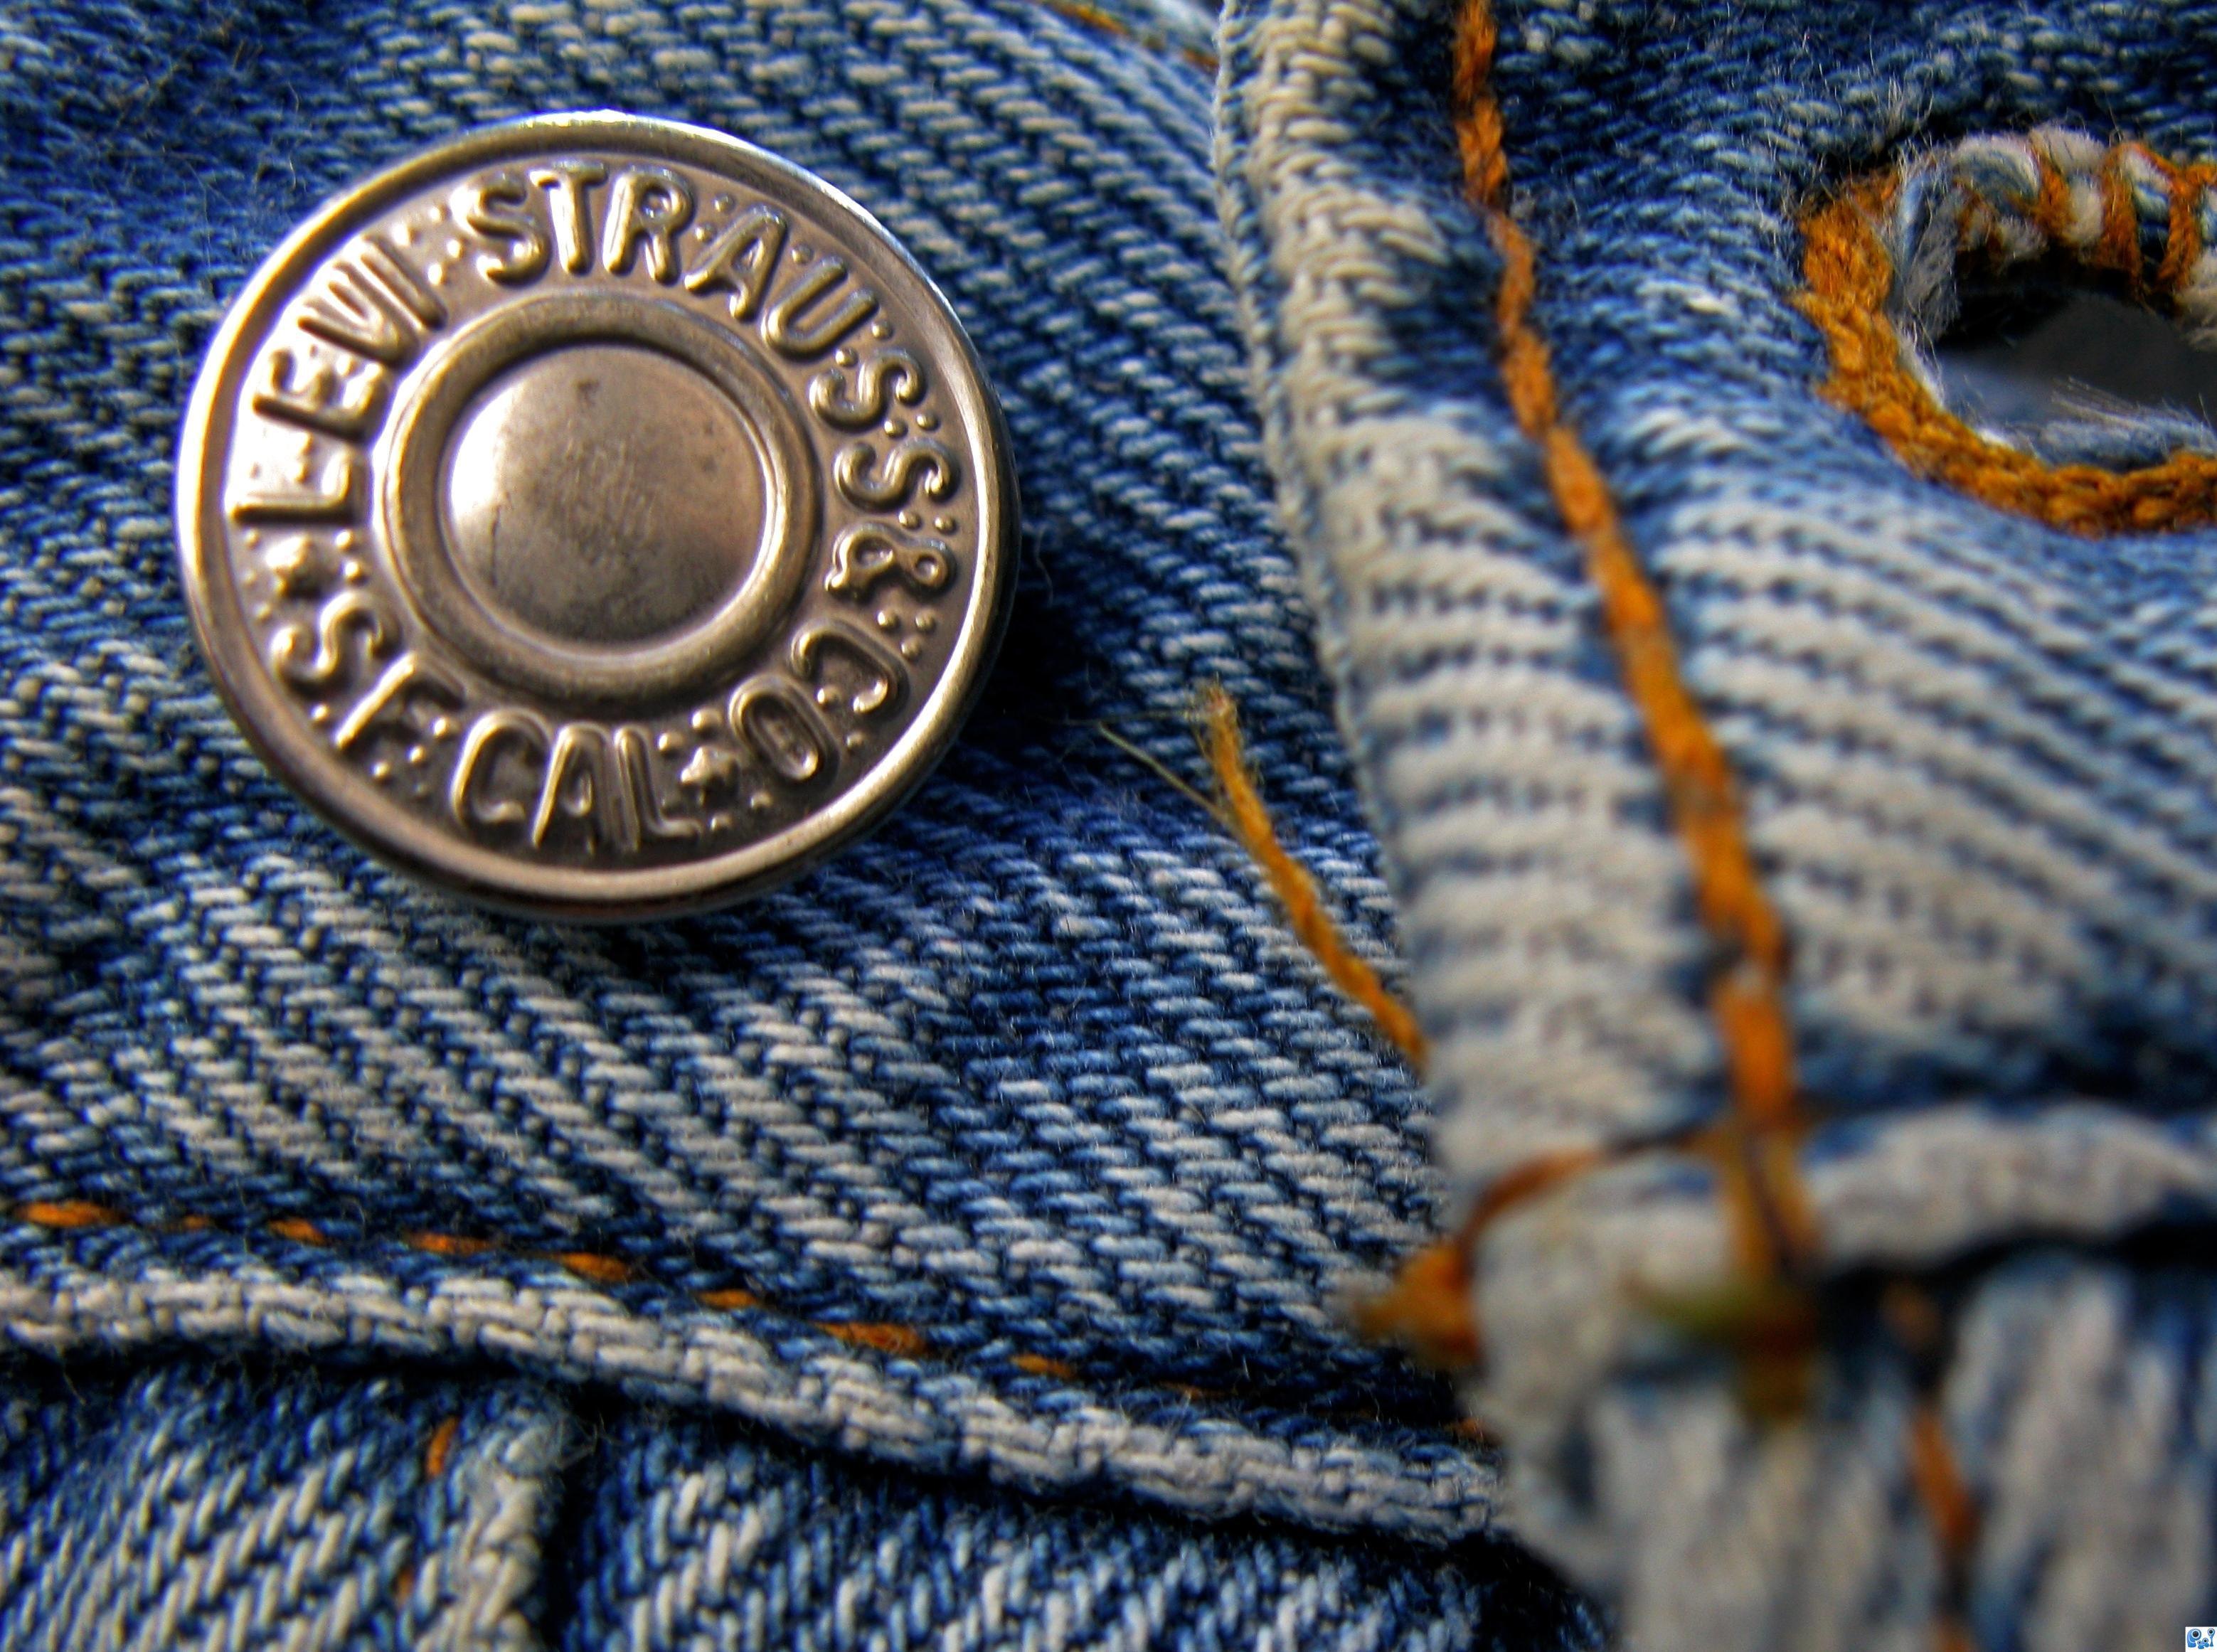 Rivet jeans Levi`s wallpaper and image, picture